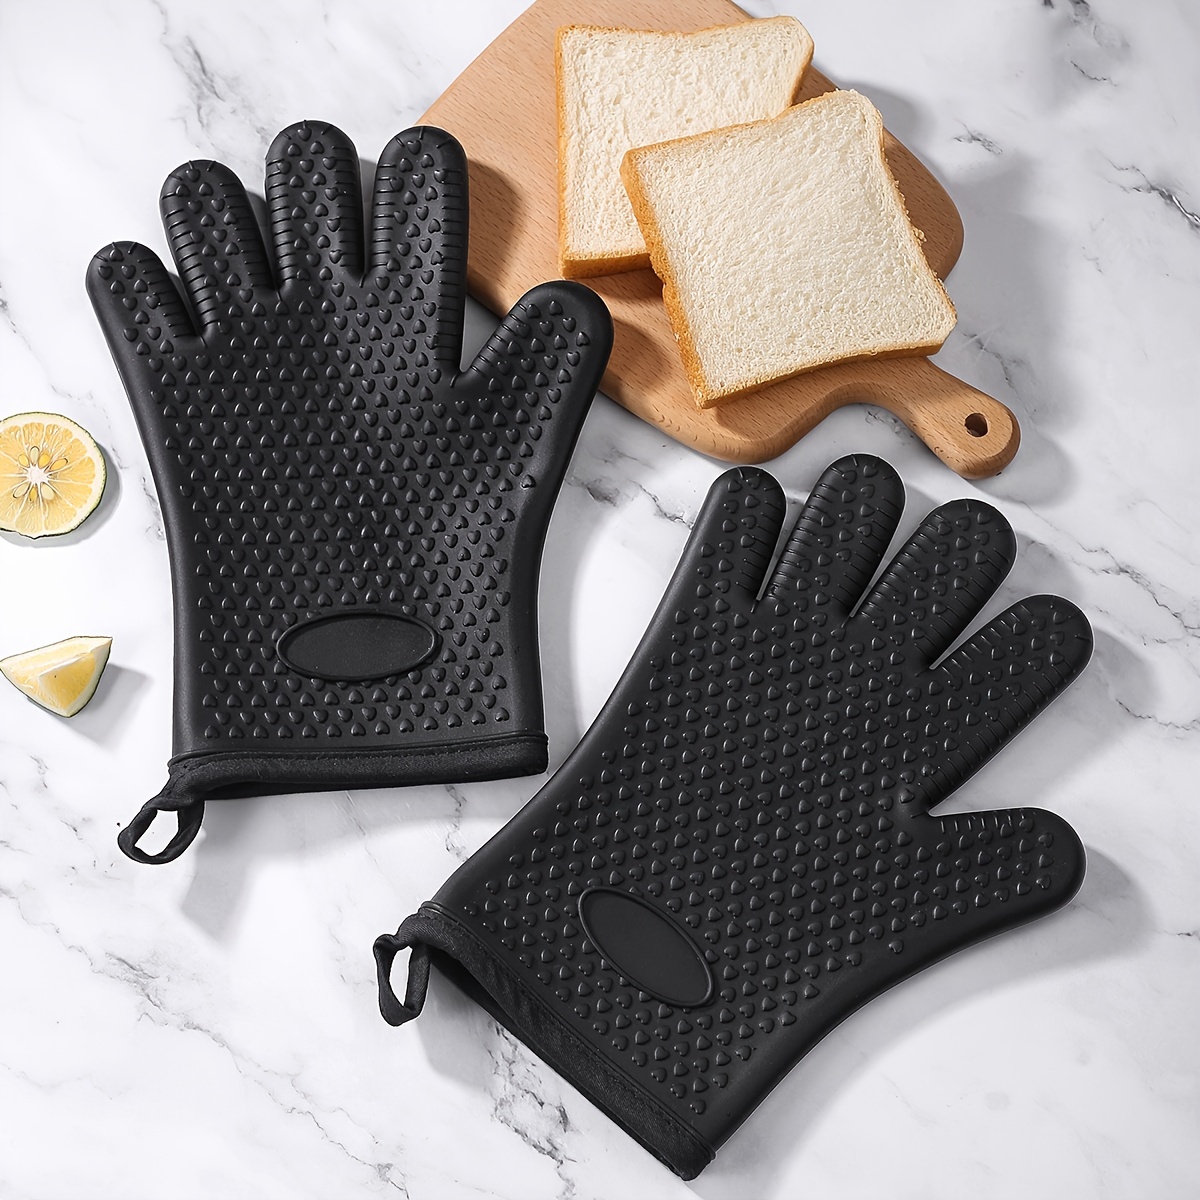  Silicone Oven Mitts Heat Resistant, Oven Mitts and Pot